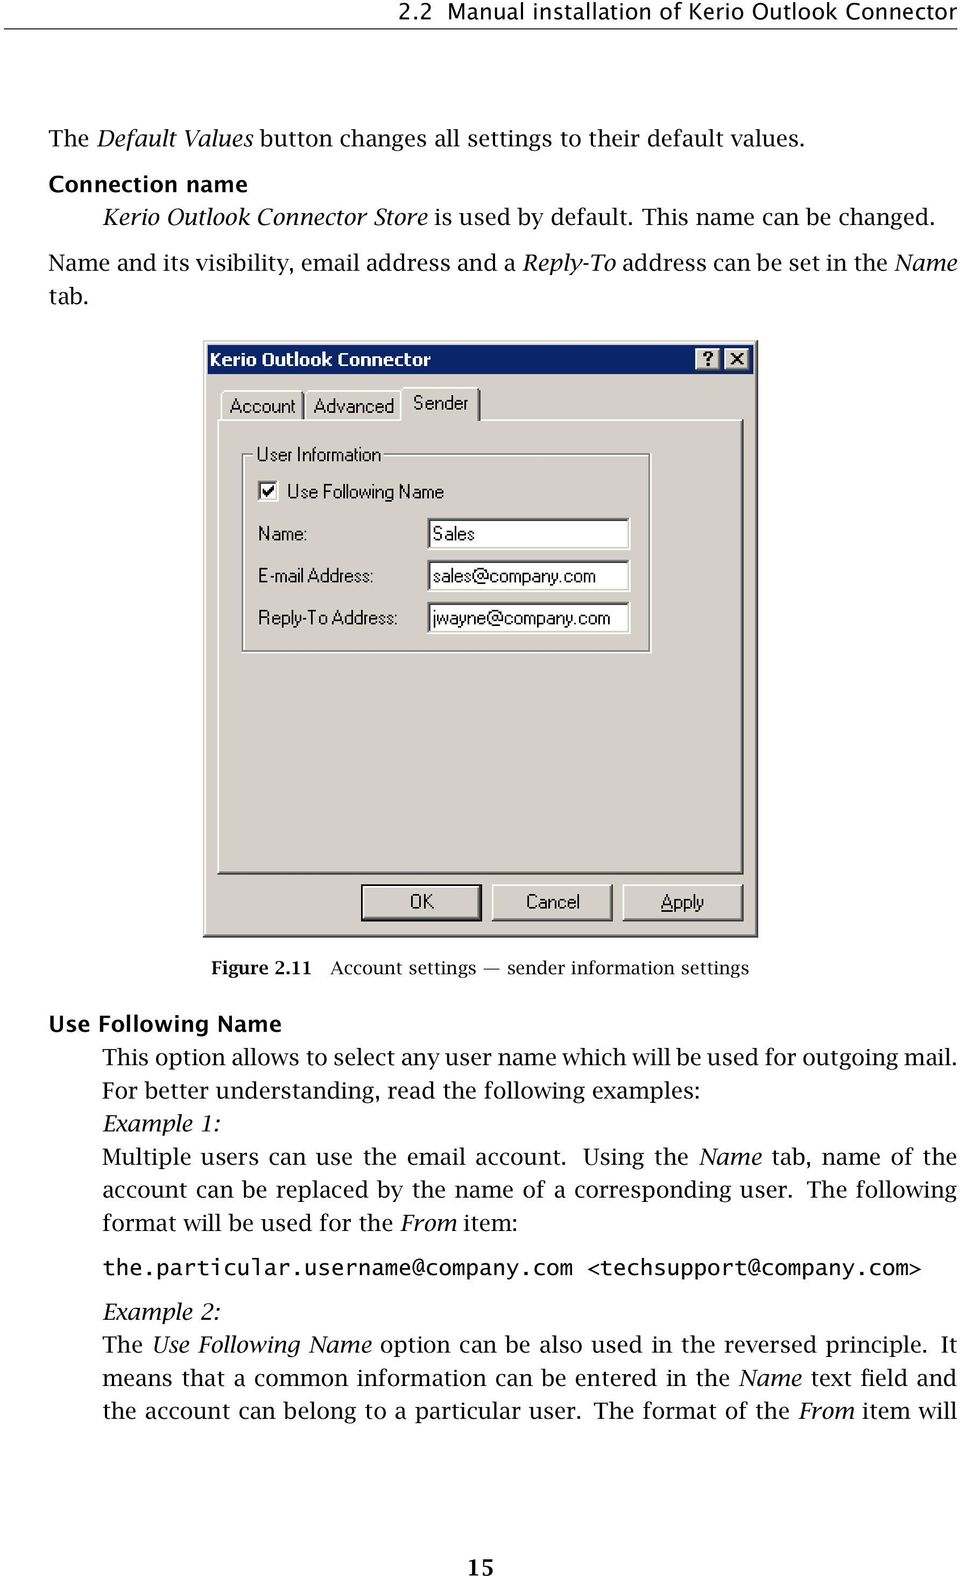 11 Account settings sender information settings Use Following Name This option allows to select any user name which will be used for outgoing mail.